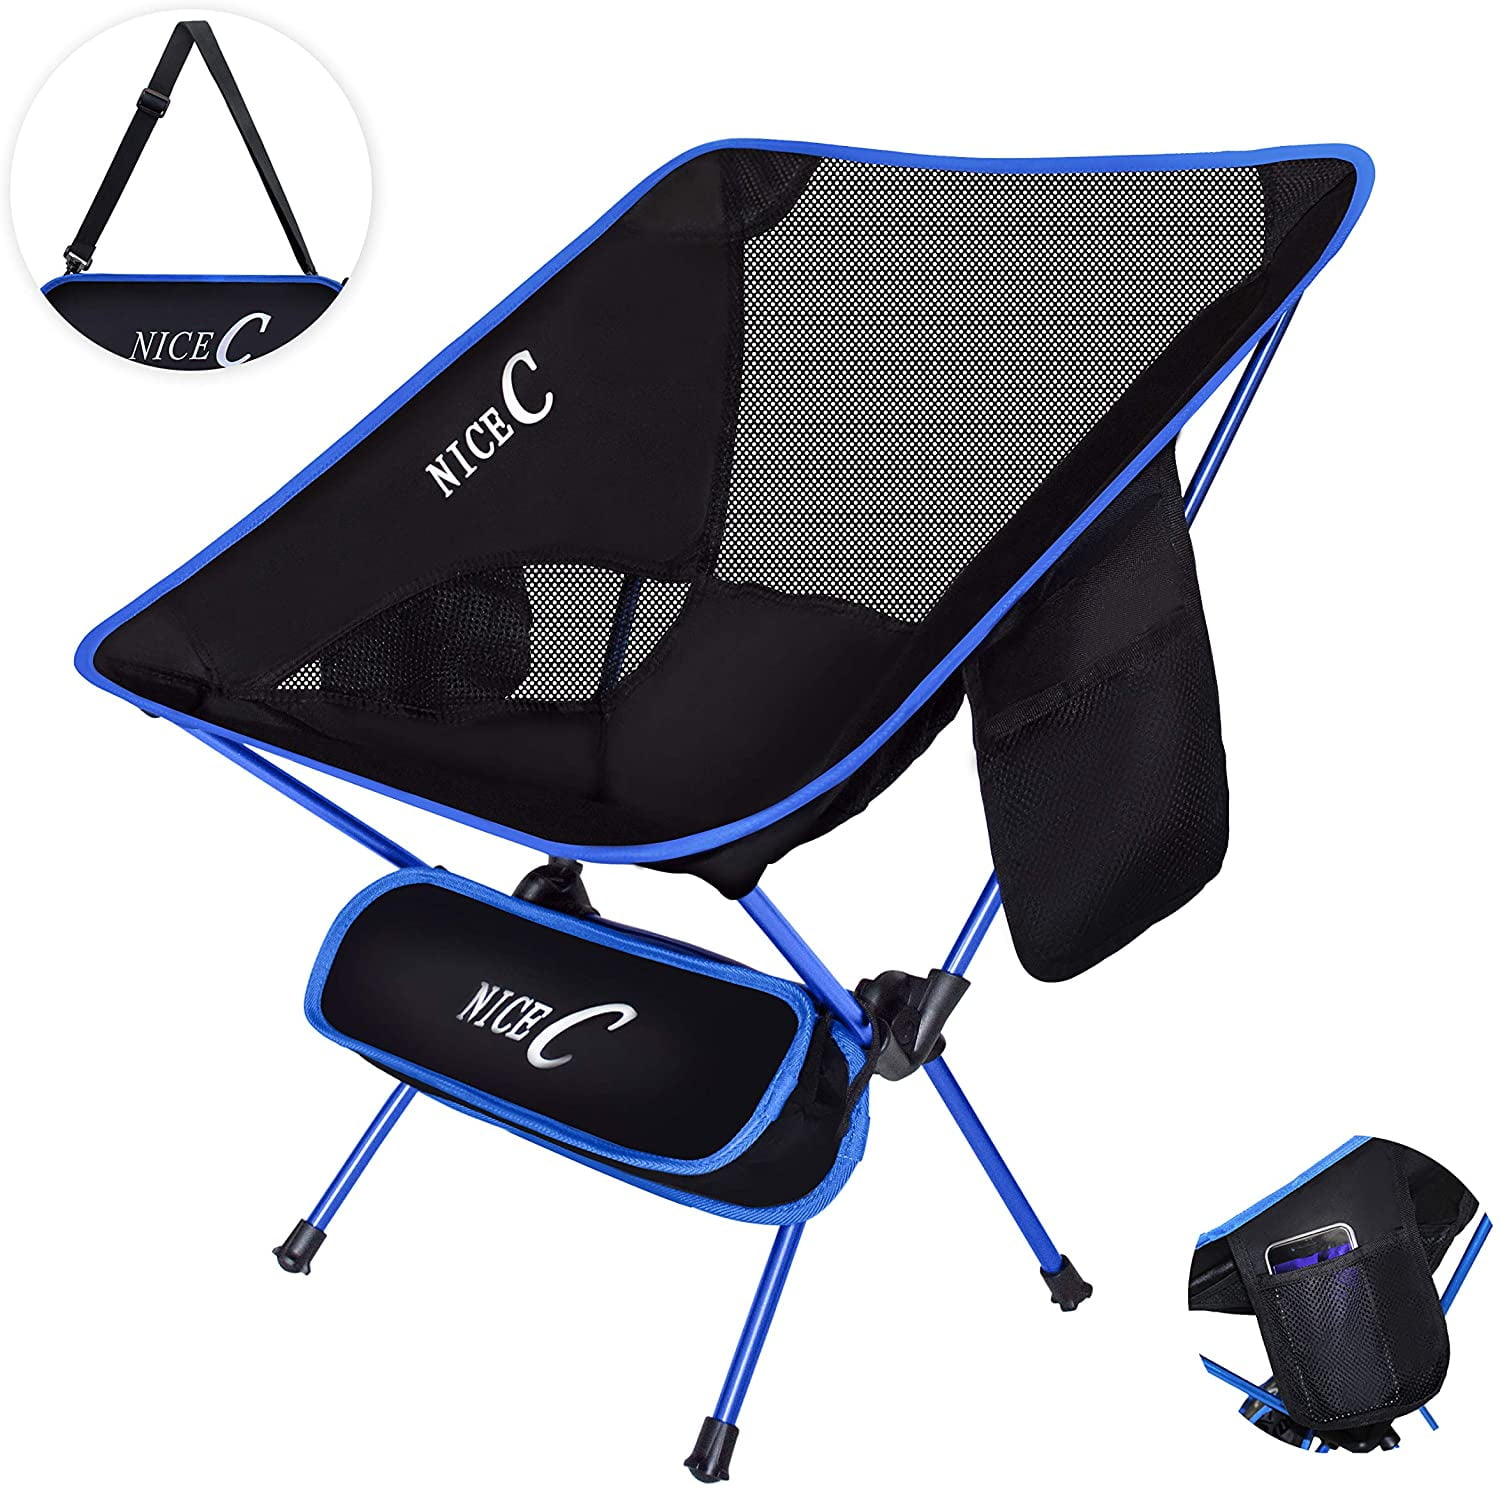 Camping Festival with 2 Storage Bags&Carry Bag Beach Nice C Ultralight Portable Folding Camping Backpacking Chair Compact & Heavy Duty Outdoor Travel BBQ Picnic 